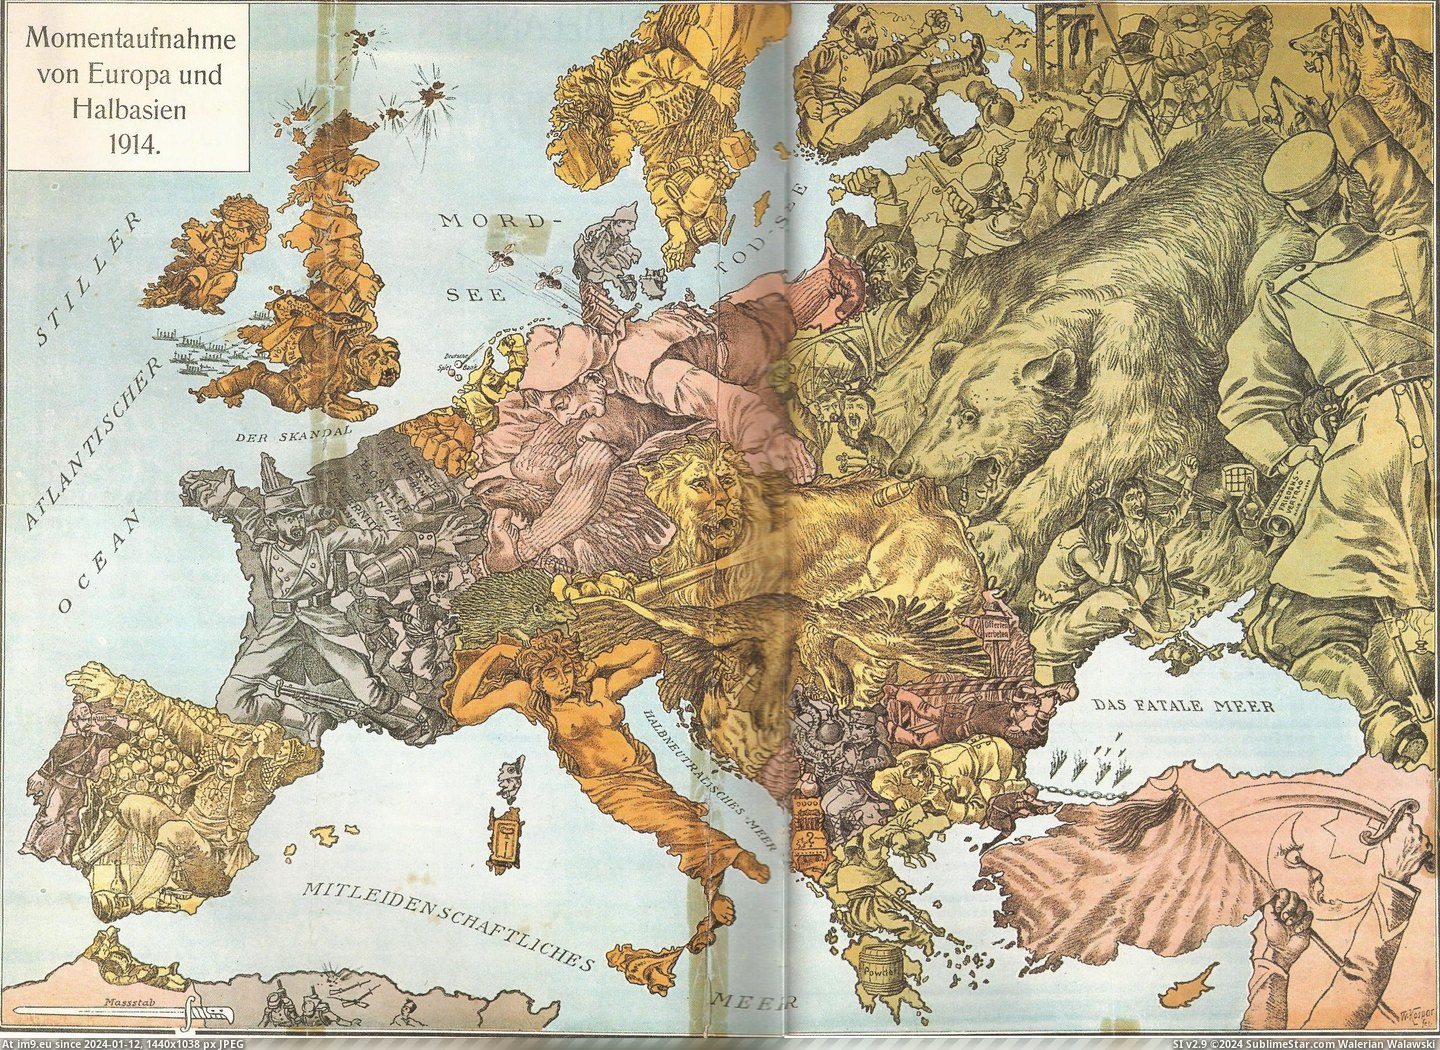 #Years #Map #Europe #Attic #Wwi #Ago #Grandparents #Png [Mapporn] WWI satirical map of Europe - found in my grandparents attic years ago [2493x1809][PNG] Pic. (Image of album My r/MAPS favs))